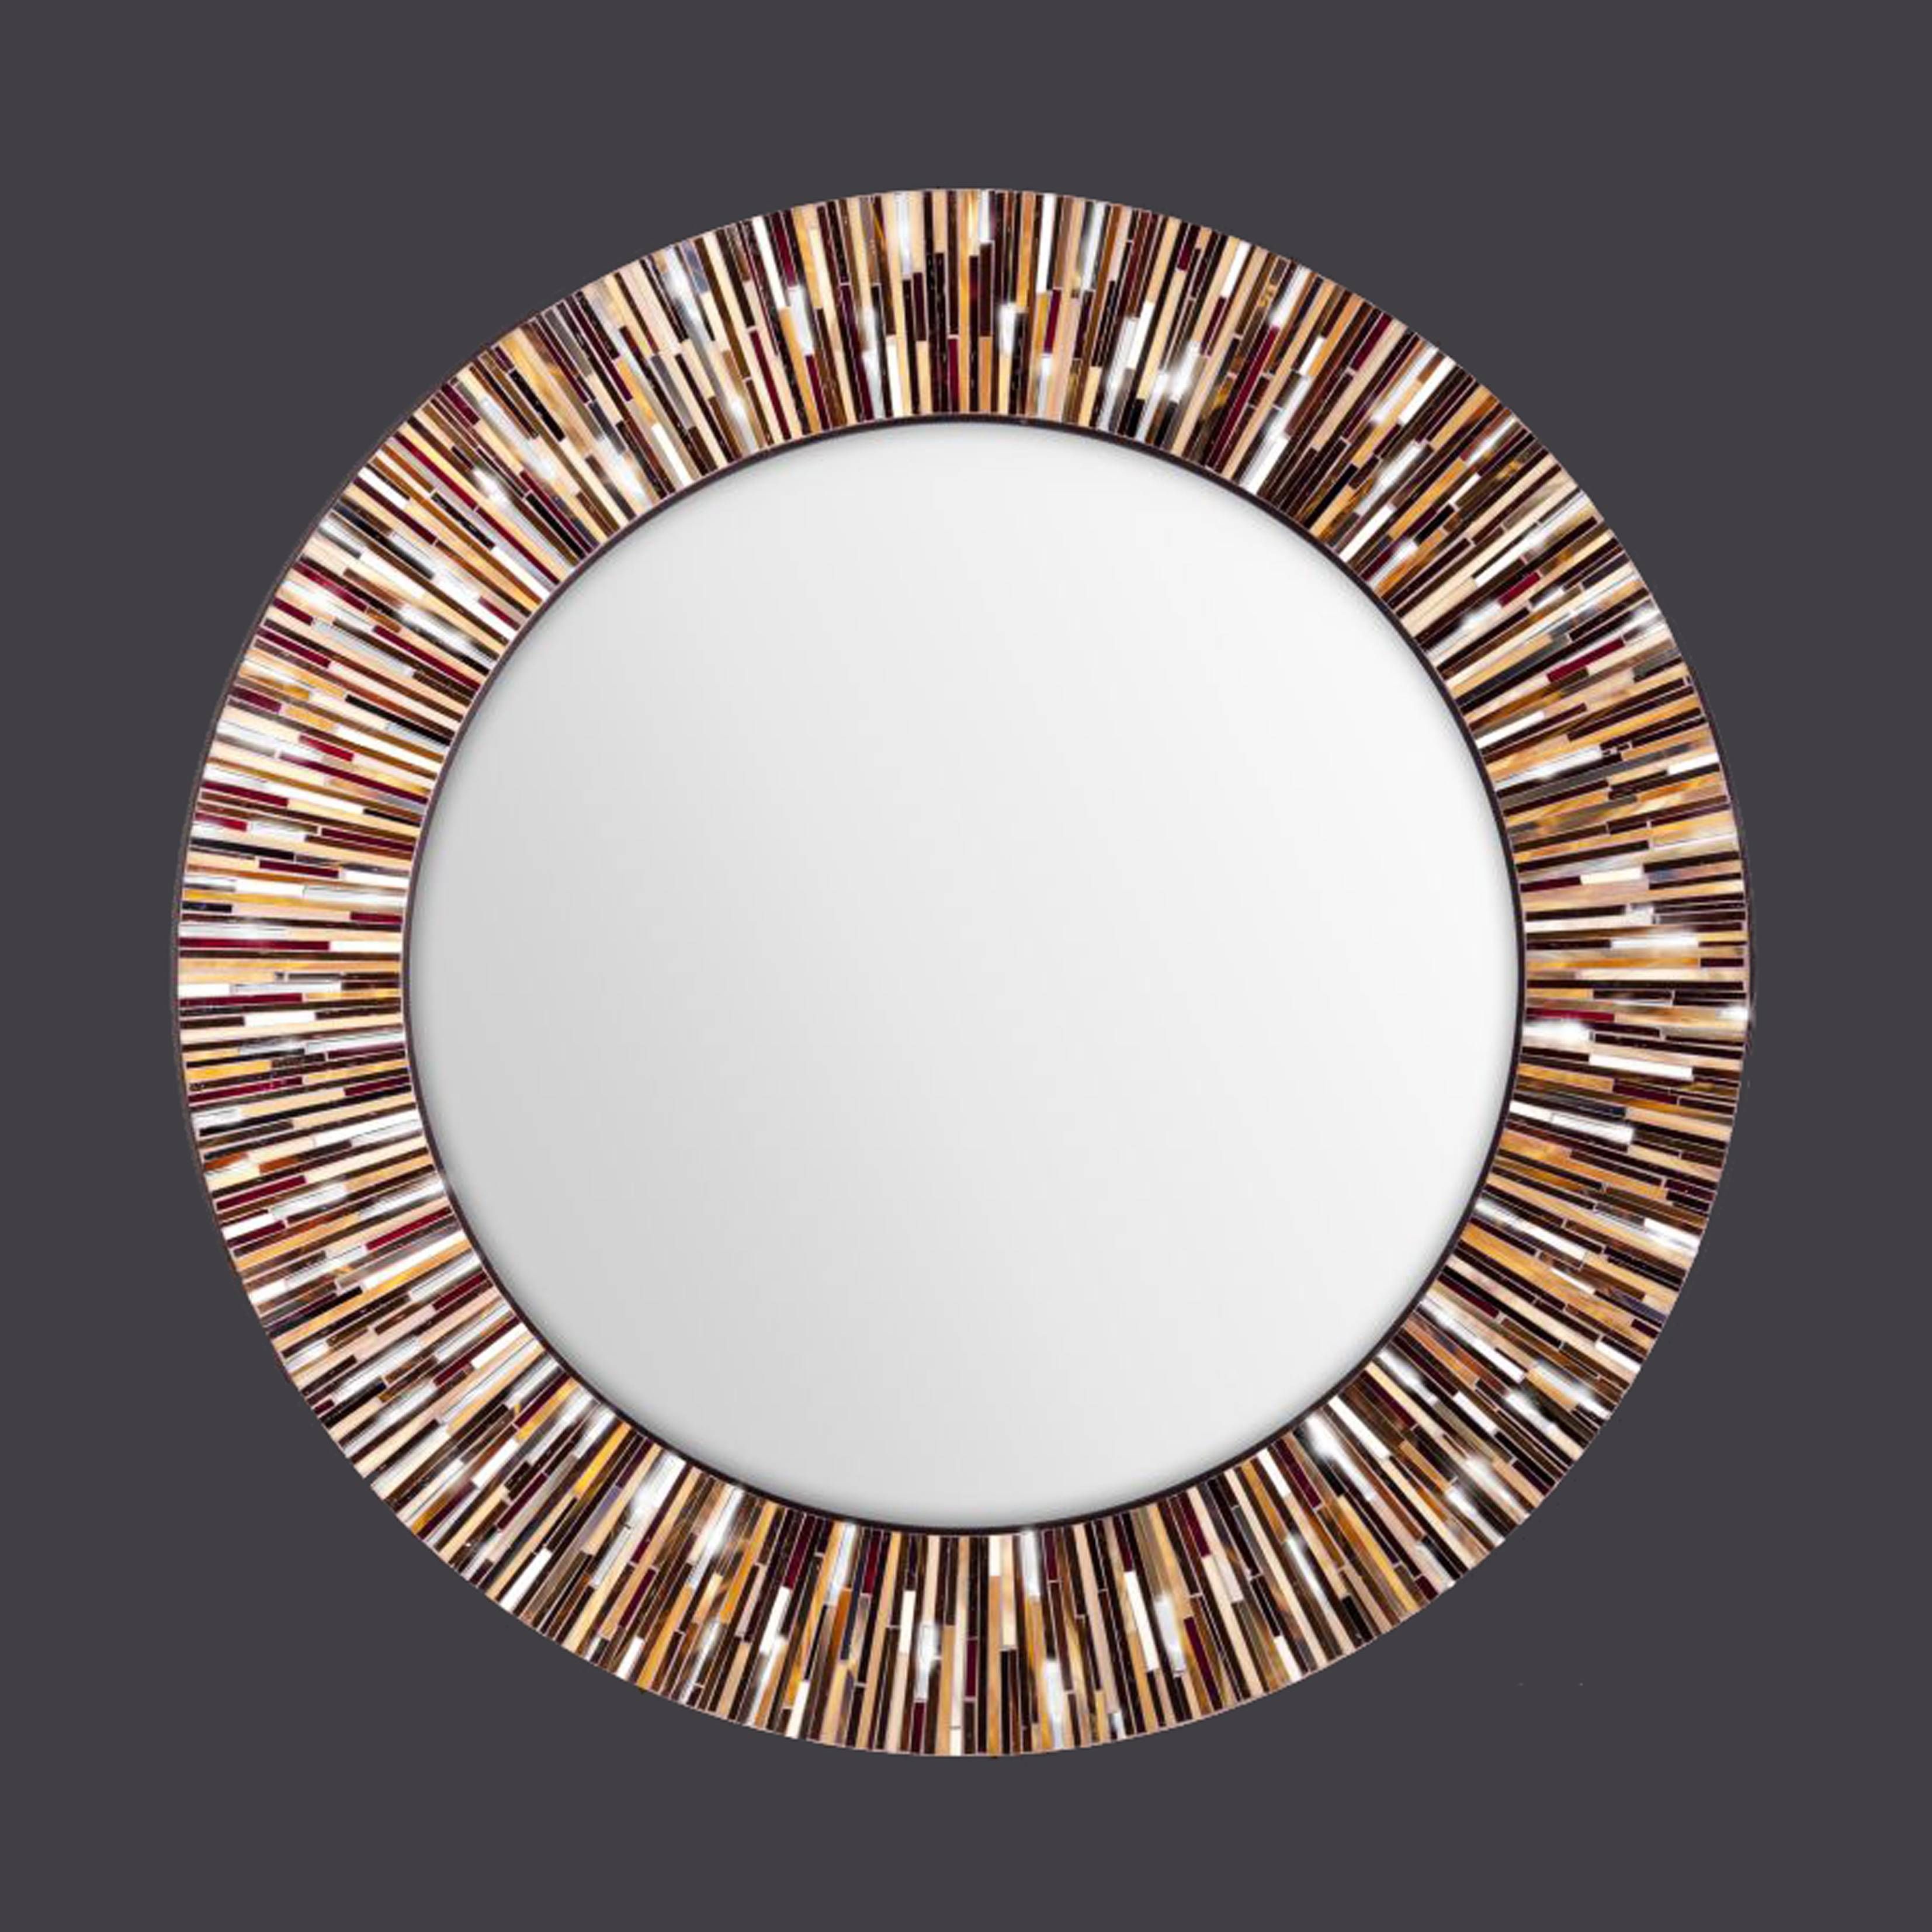 Large Mosai Glass Mirrors In Mosaic Mirrors (View 25 of 25)